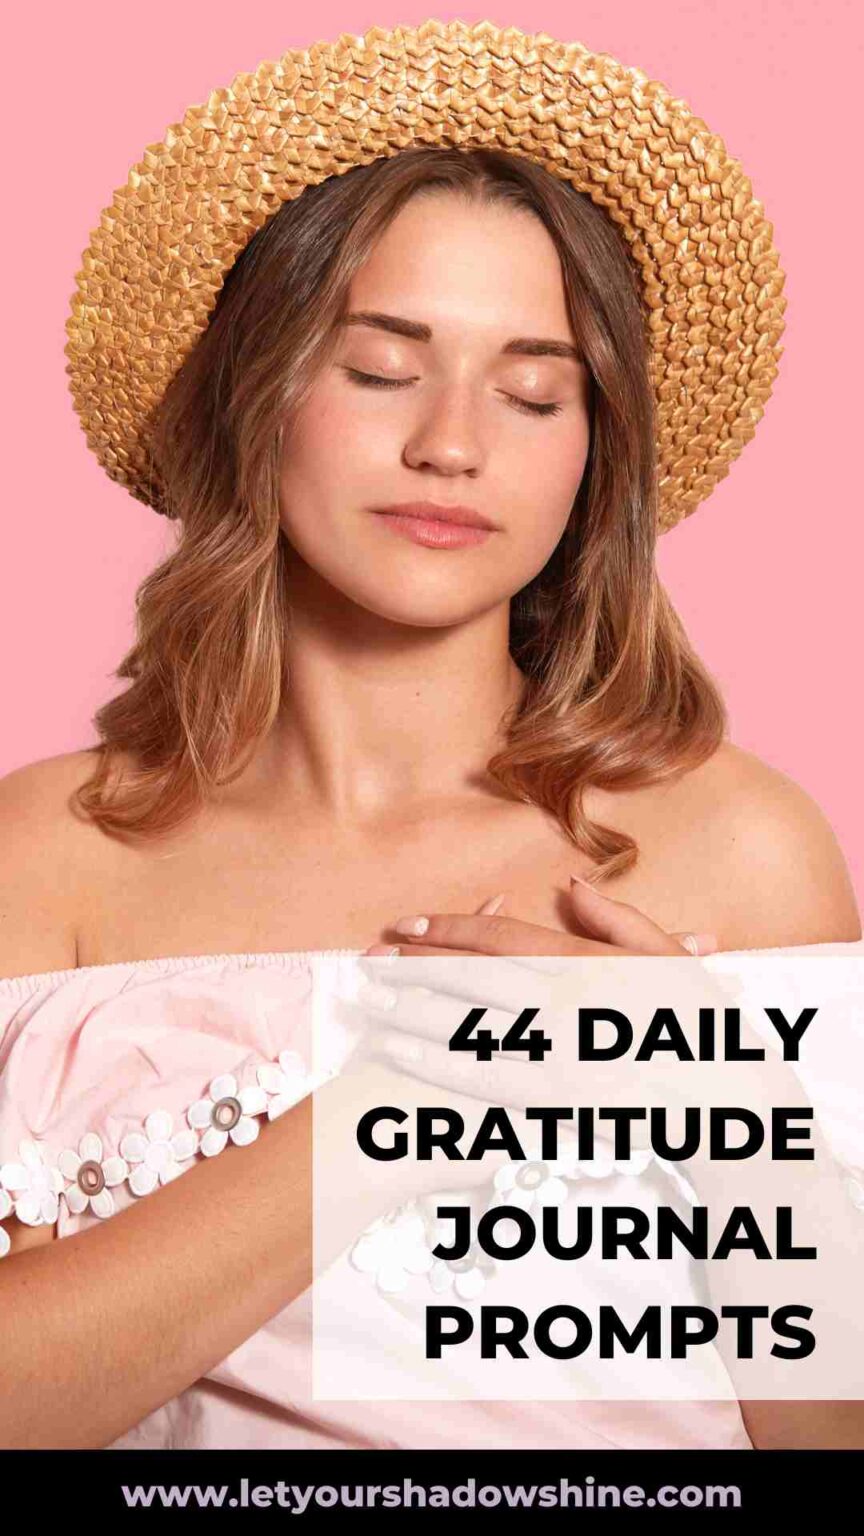 44-daily-gratitude-journal-prompts-unlock-your-inner-joy-let-your-shadow-shine